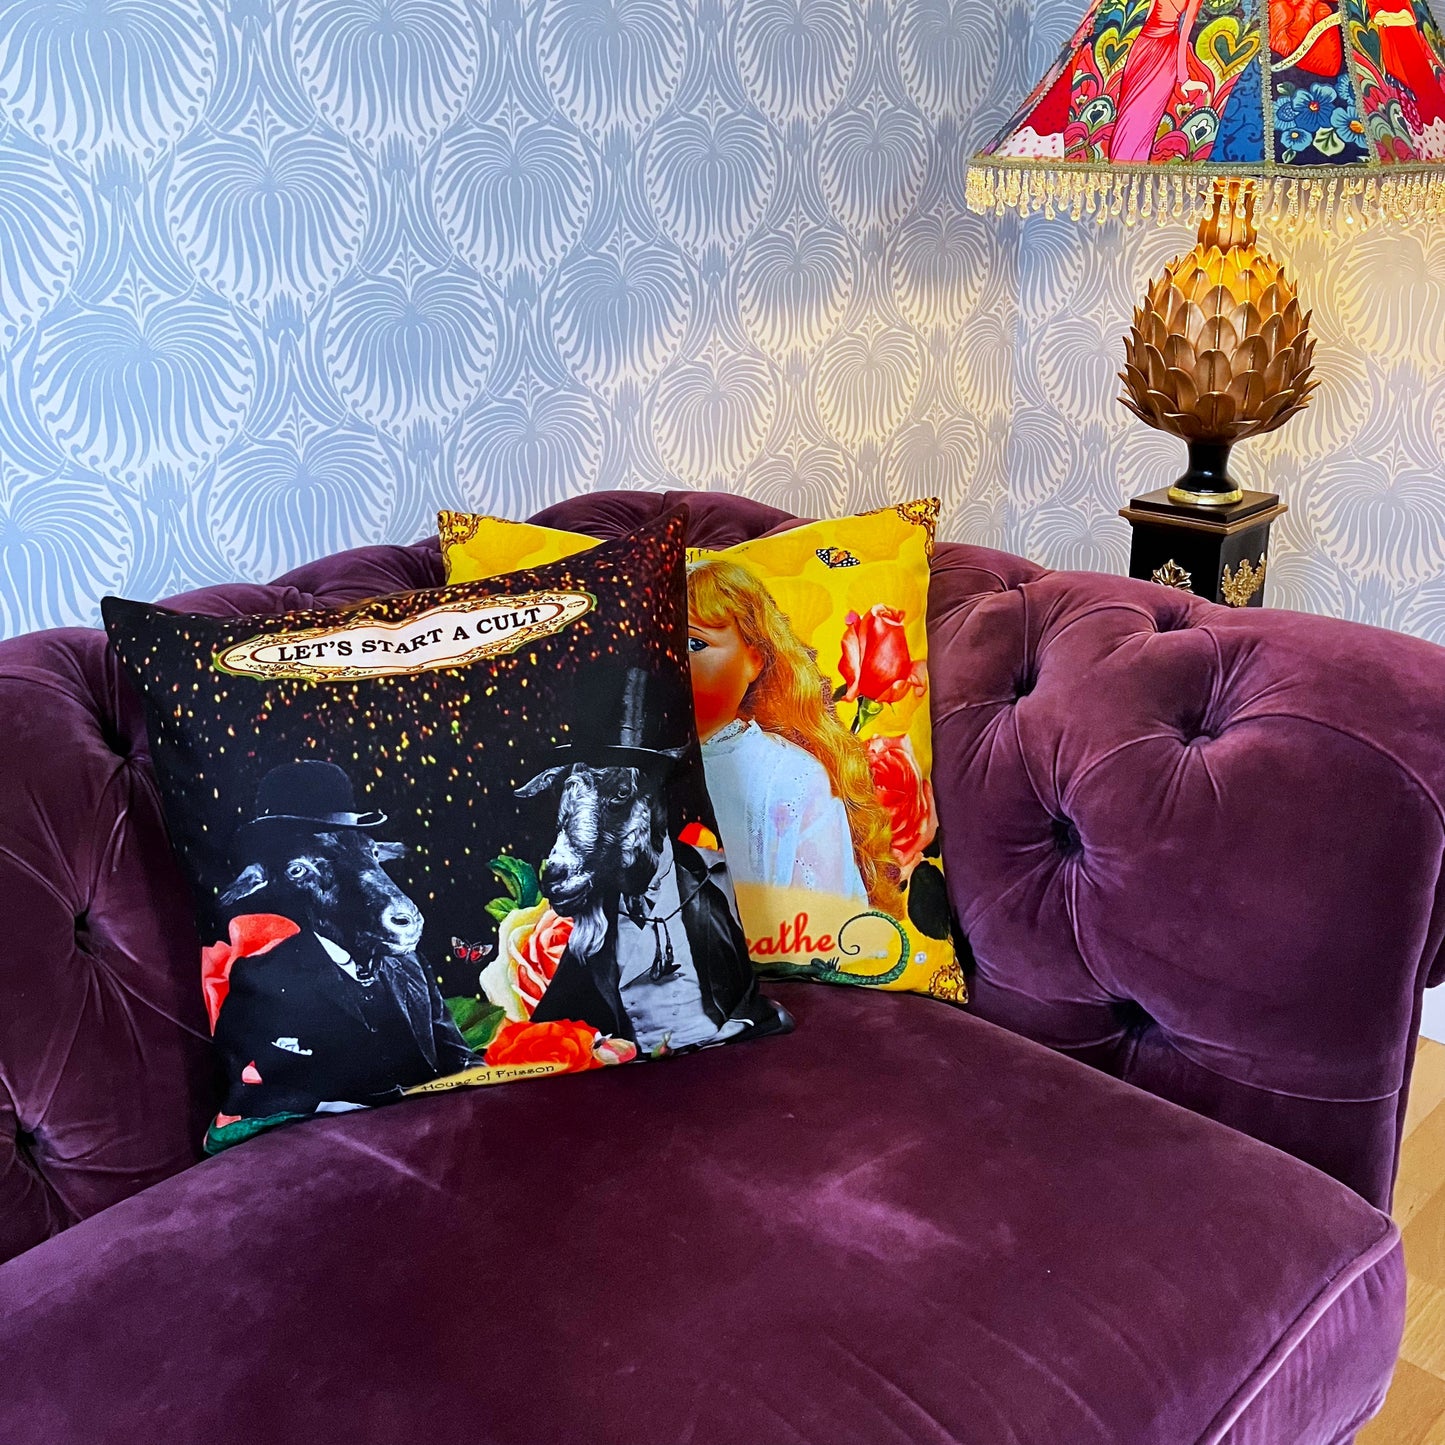 "Let's Start A Cult" Cushion Cover by House of Frisson, featuring a collage of two Victorian-dressed  glentlemen with goat heads, surrounded by colourful flowers, against a black background. Cushion on a sofa with other cushions and ornaments.